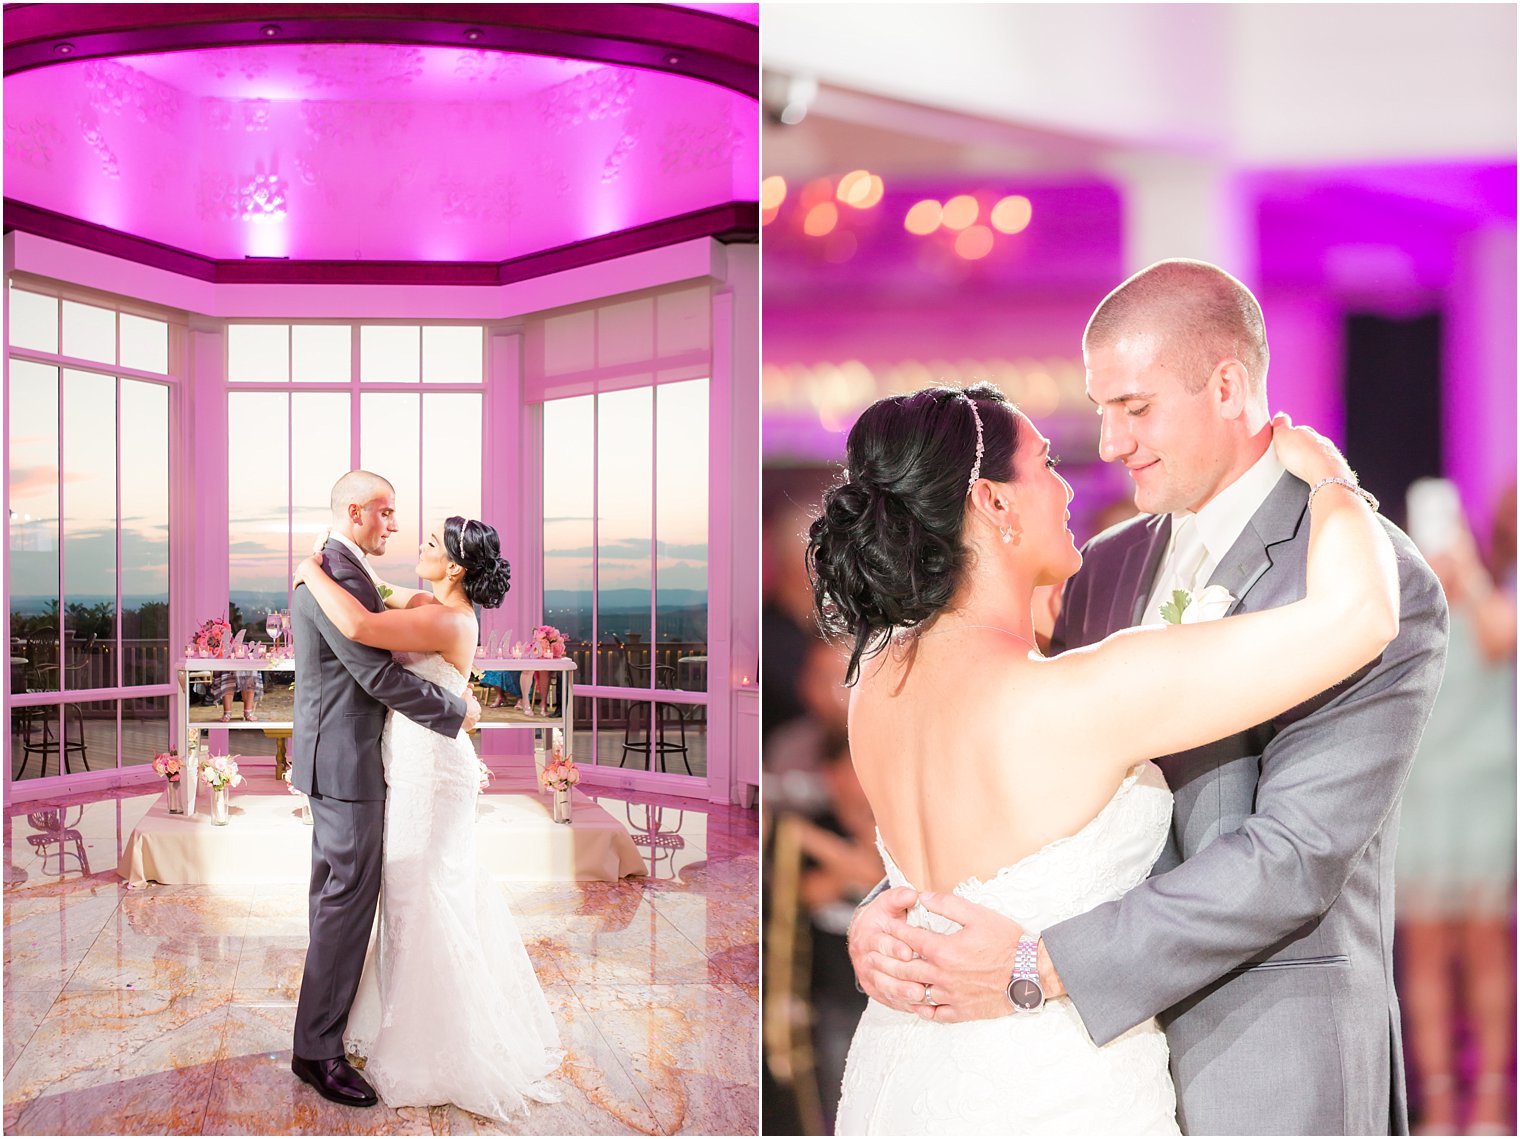 Romantic bride and groom photo during first dance